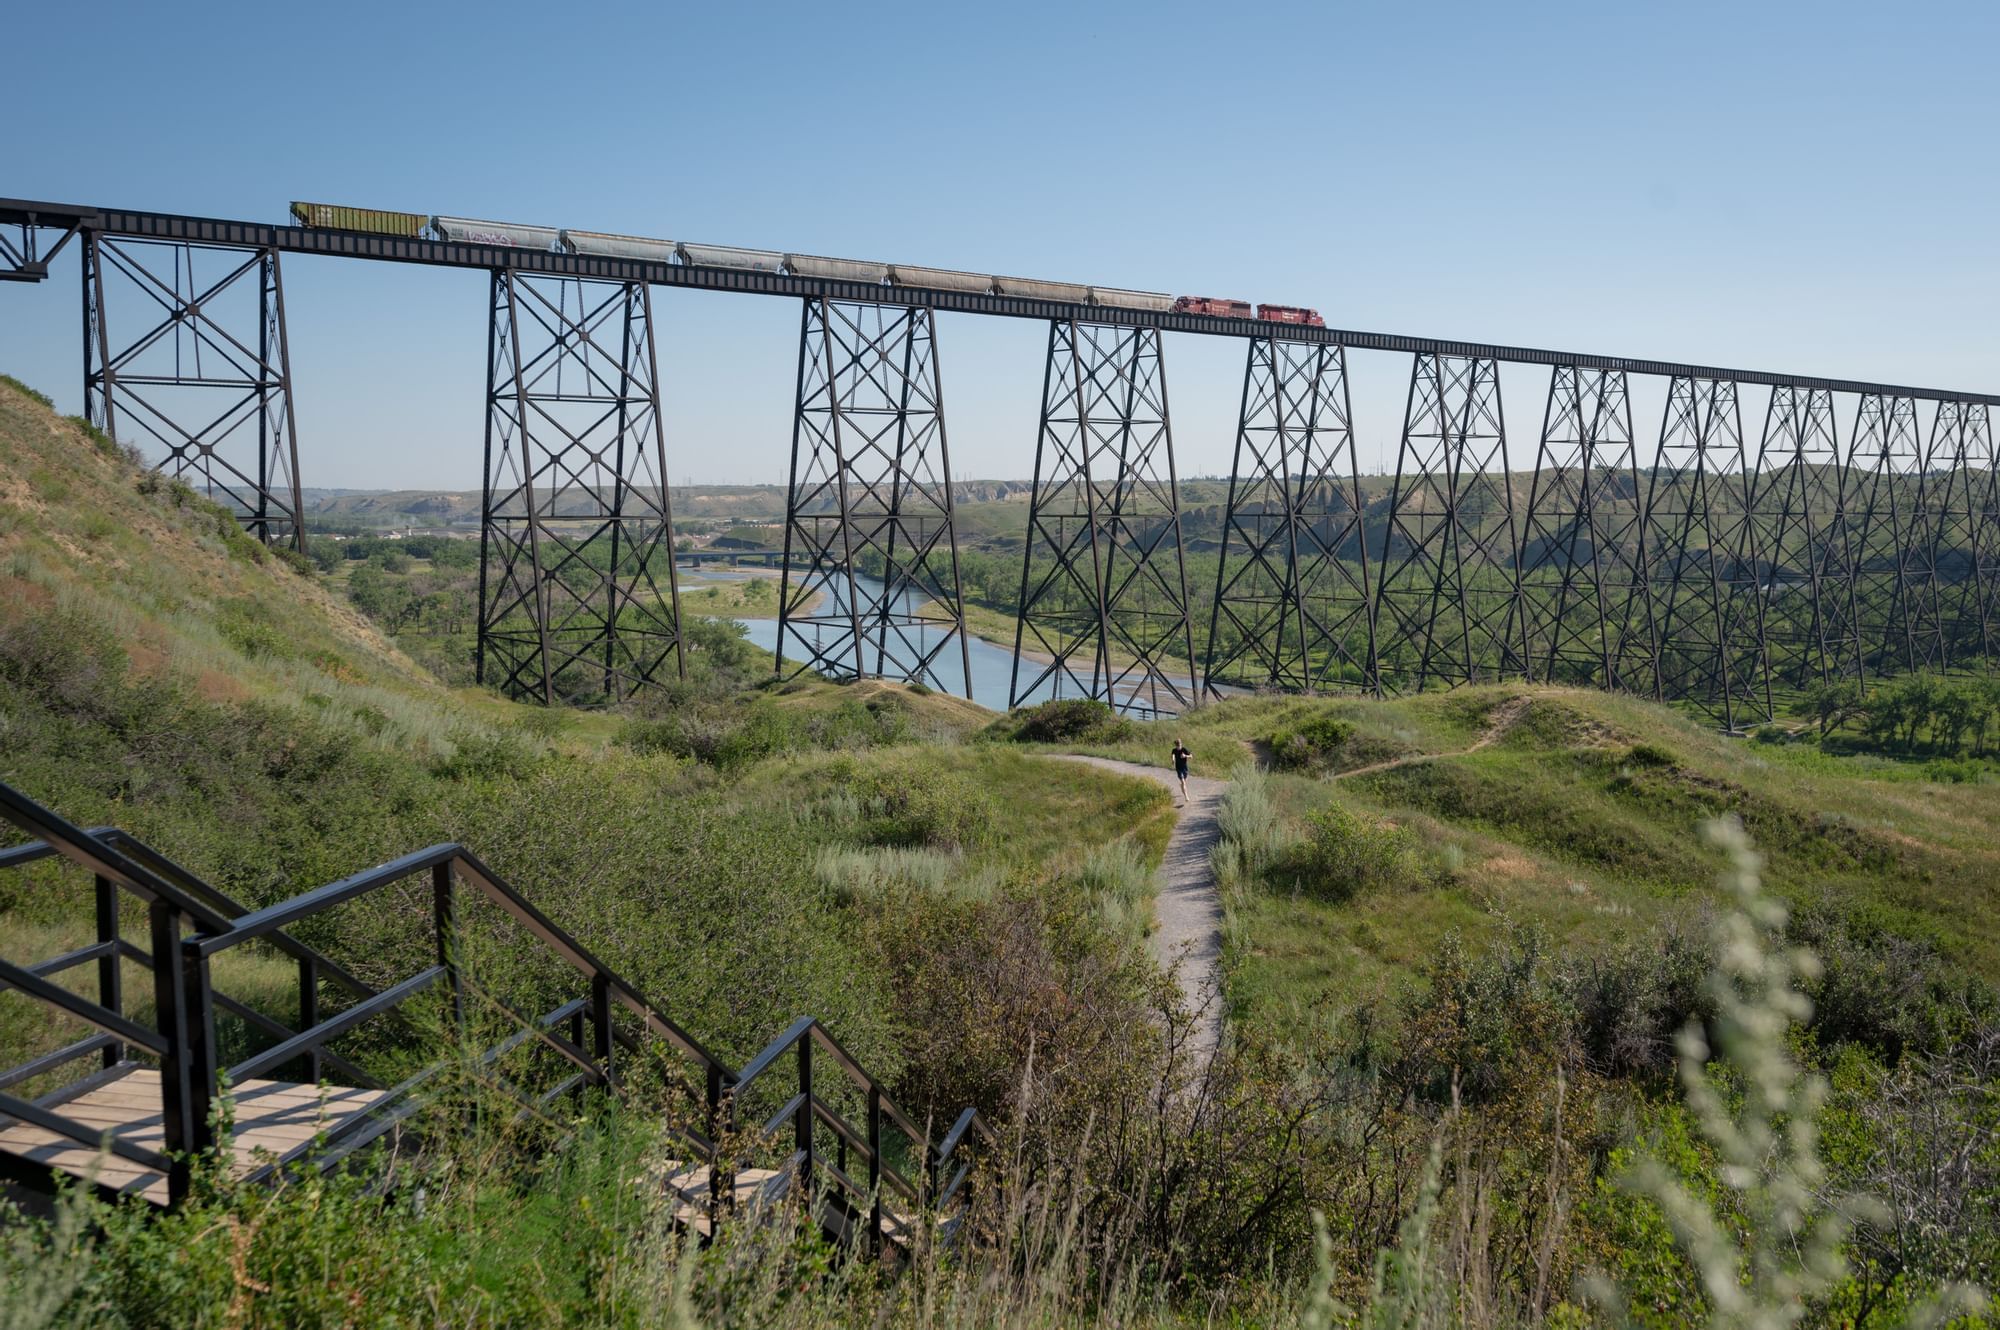 What Is Lethbridge Famous For?